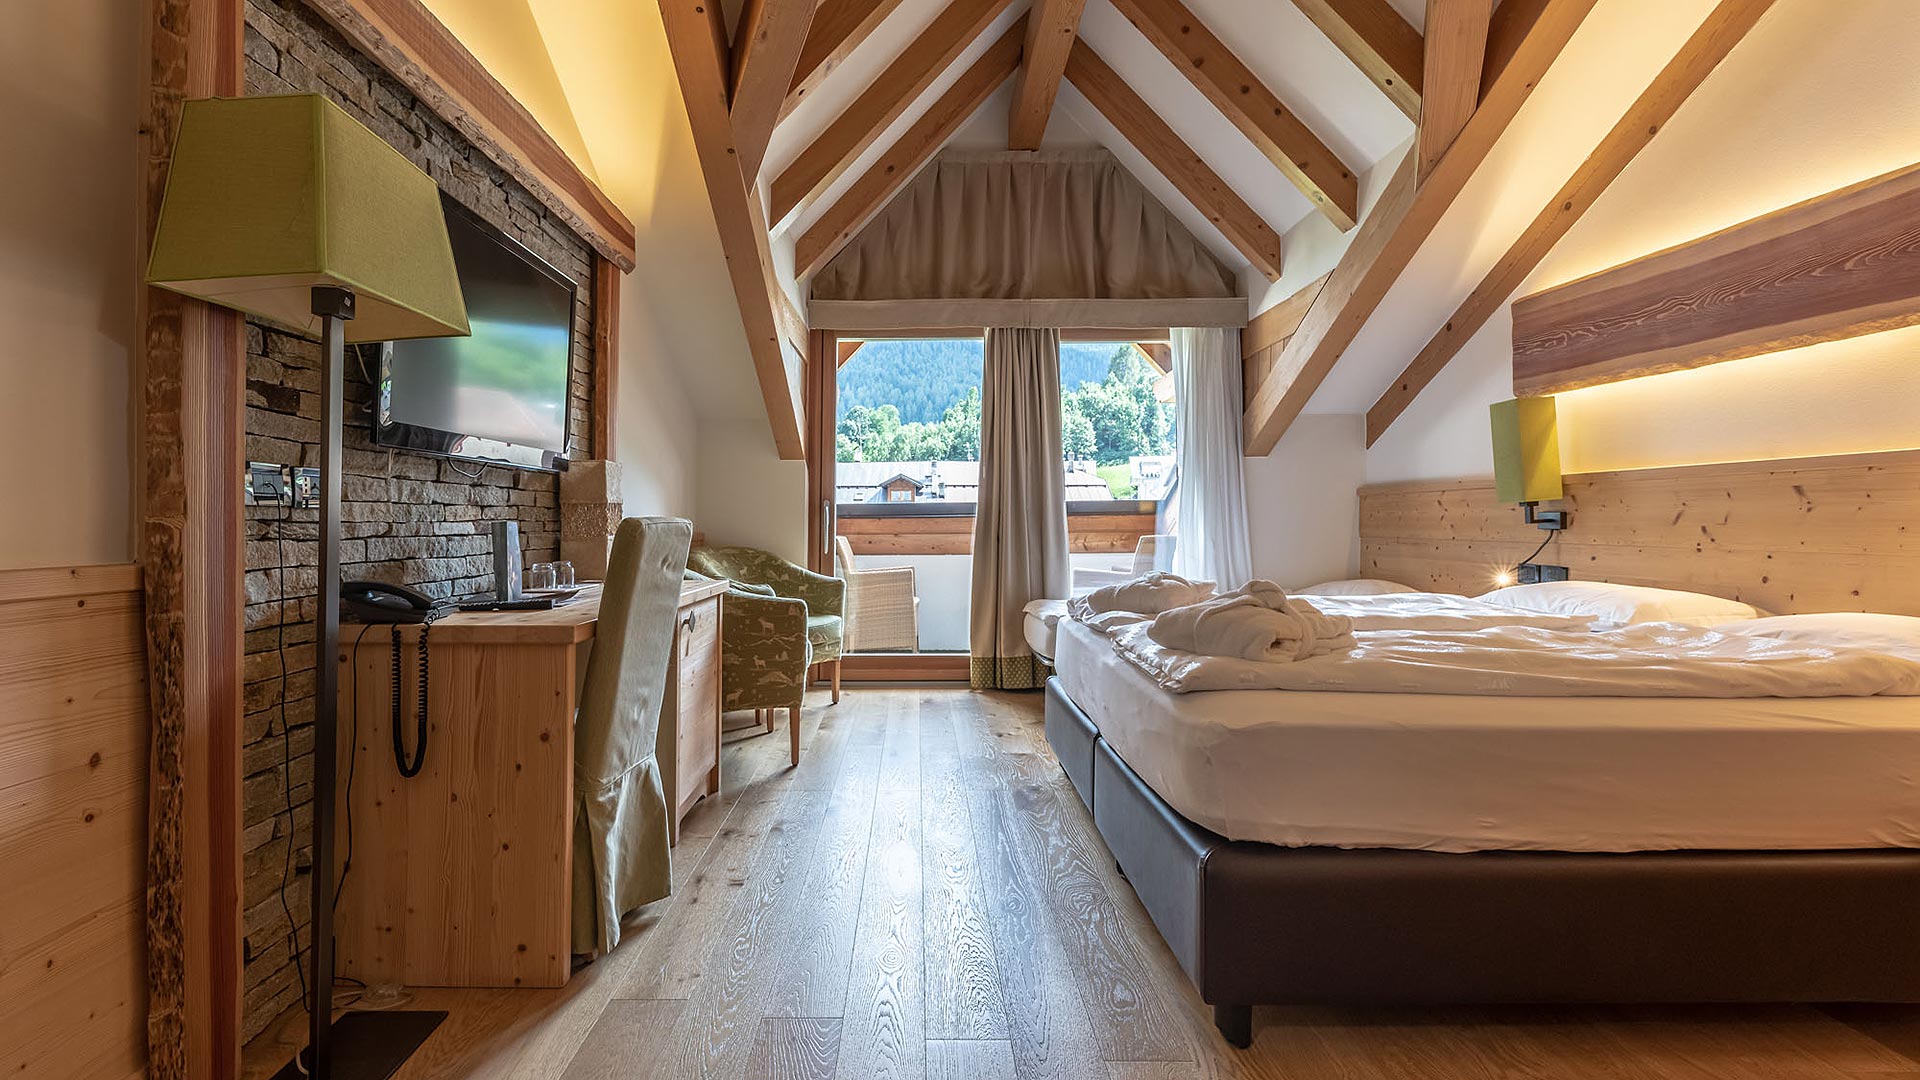 Dimaro, Val di sole Hotel AlpHoliday sleep in spacious, bright and comfortable rooms, enjoying your wellbeing.